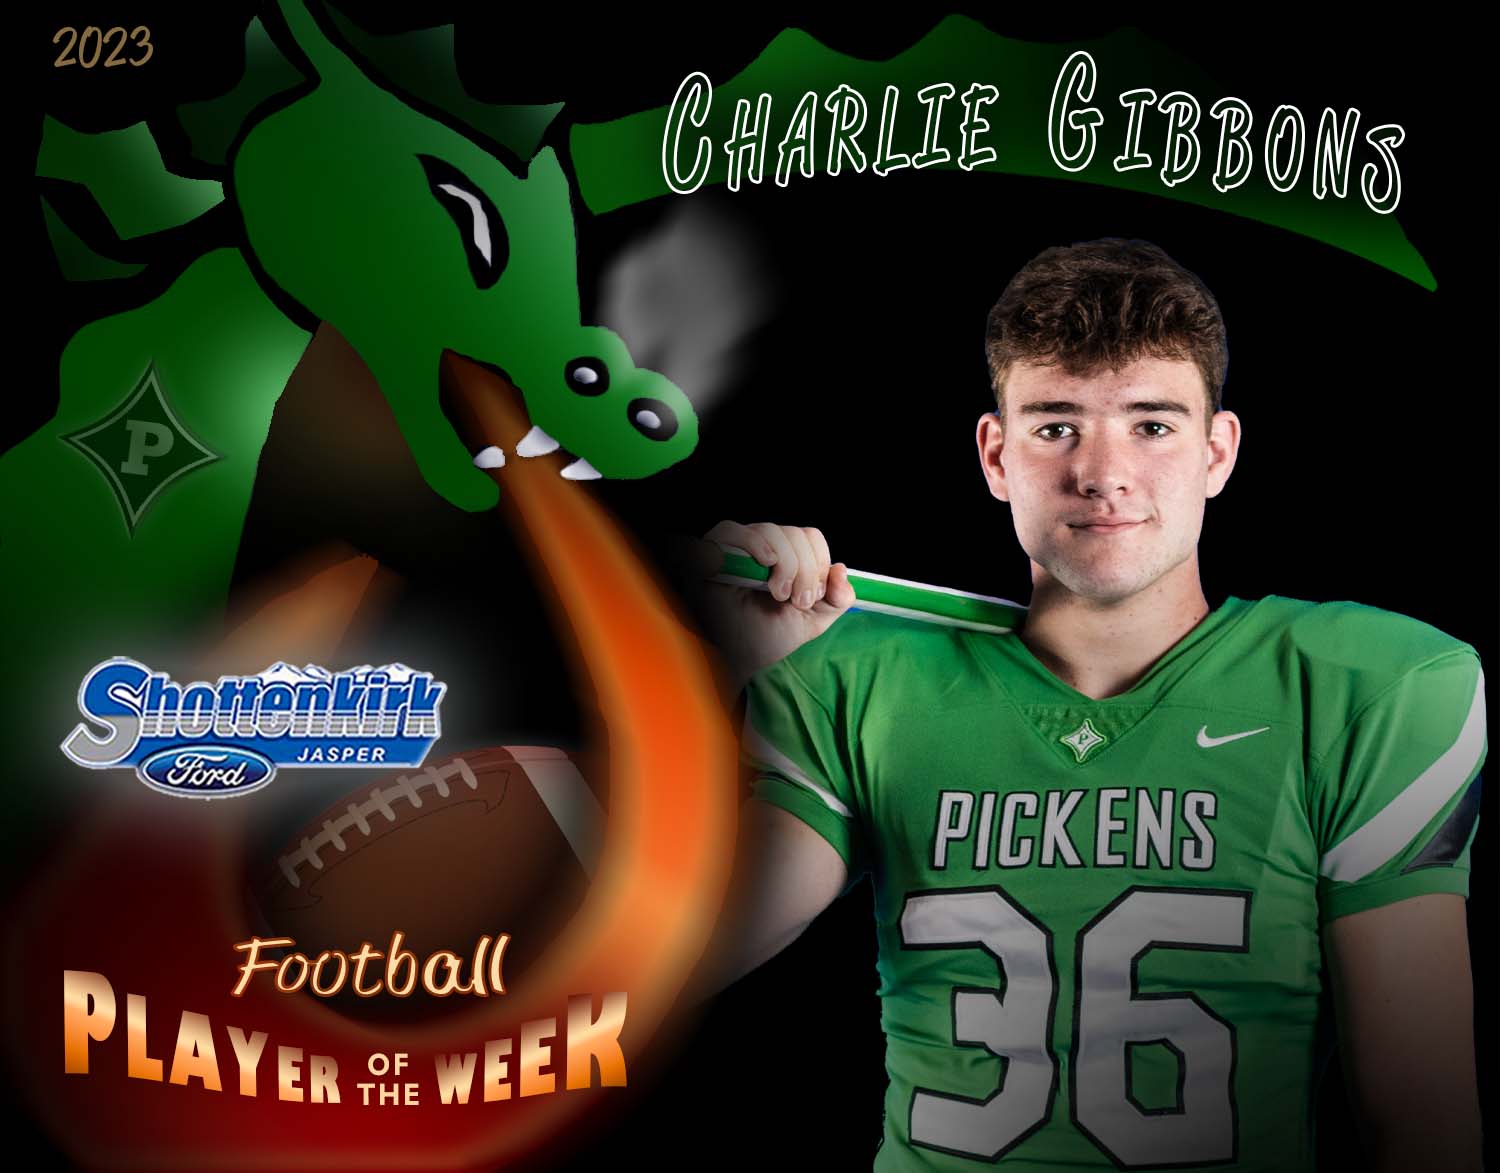 PHS Football Player of the Week #1 - Charlie Gibbons